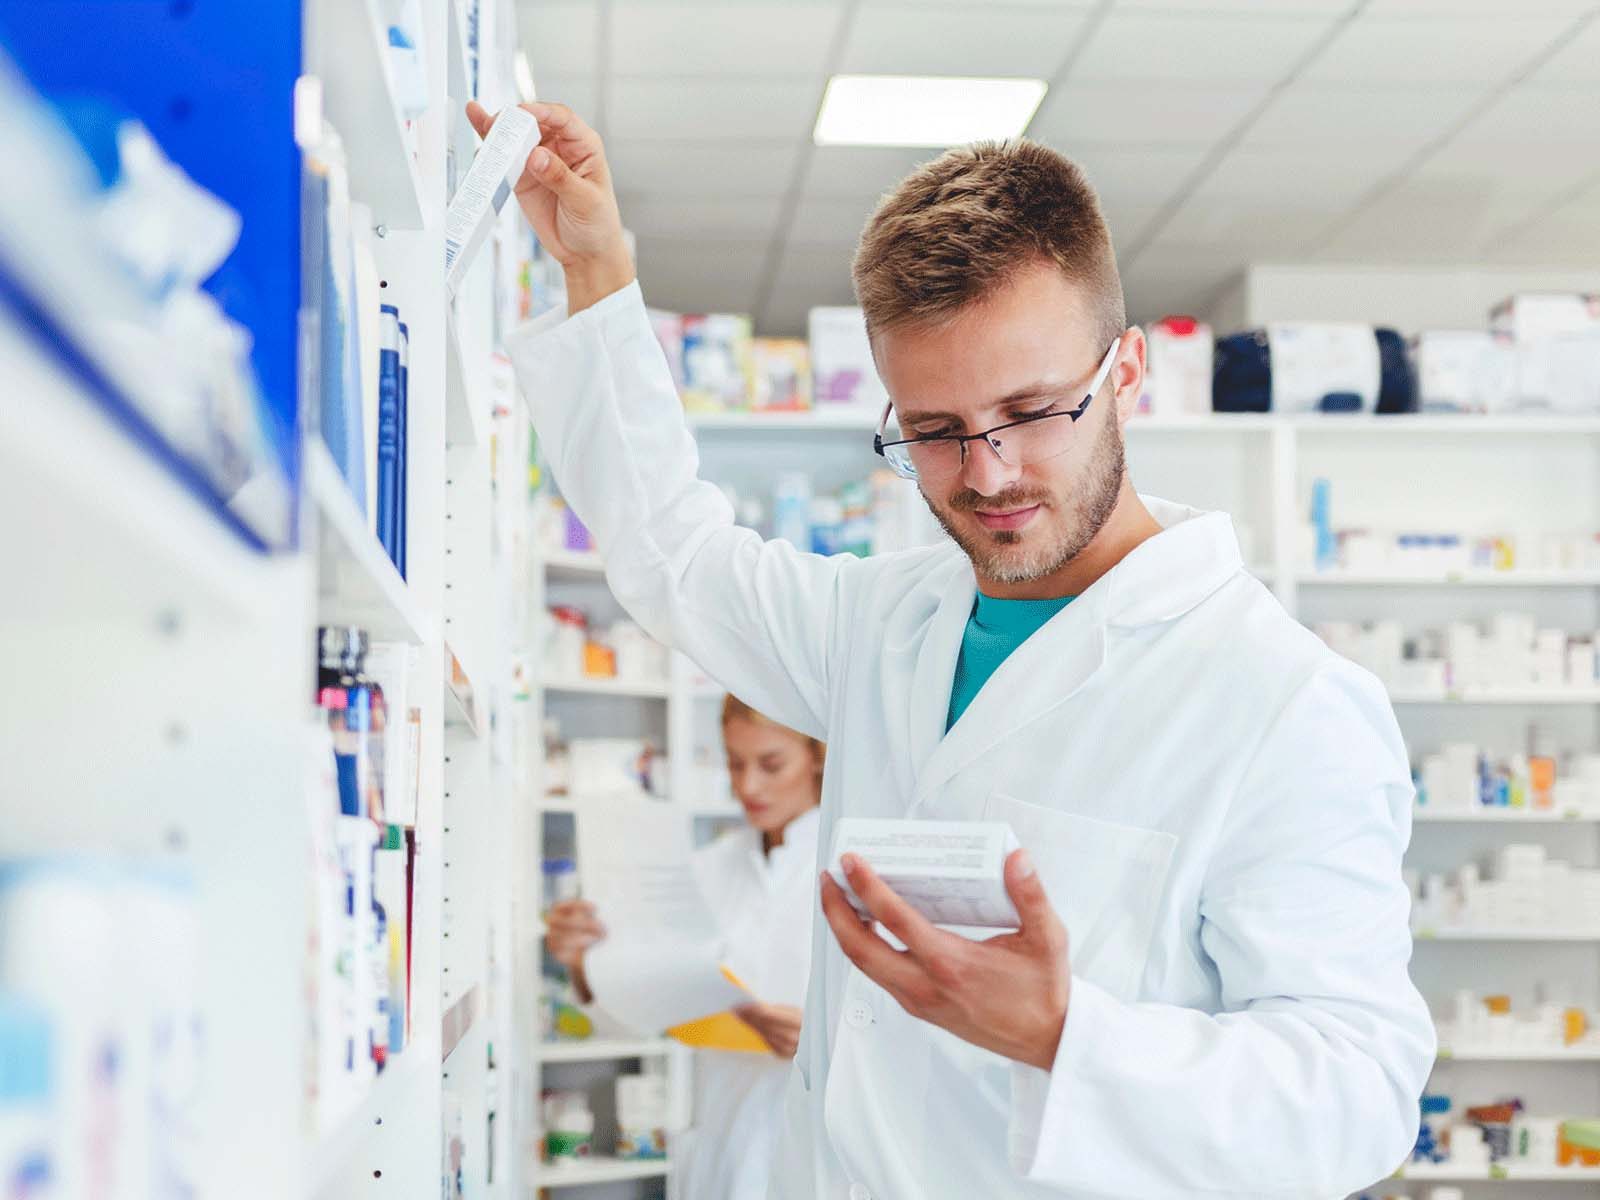 Pharmacist examining a pack of medicine